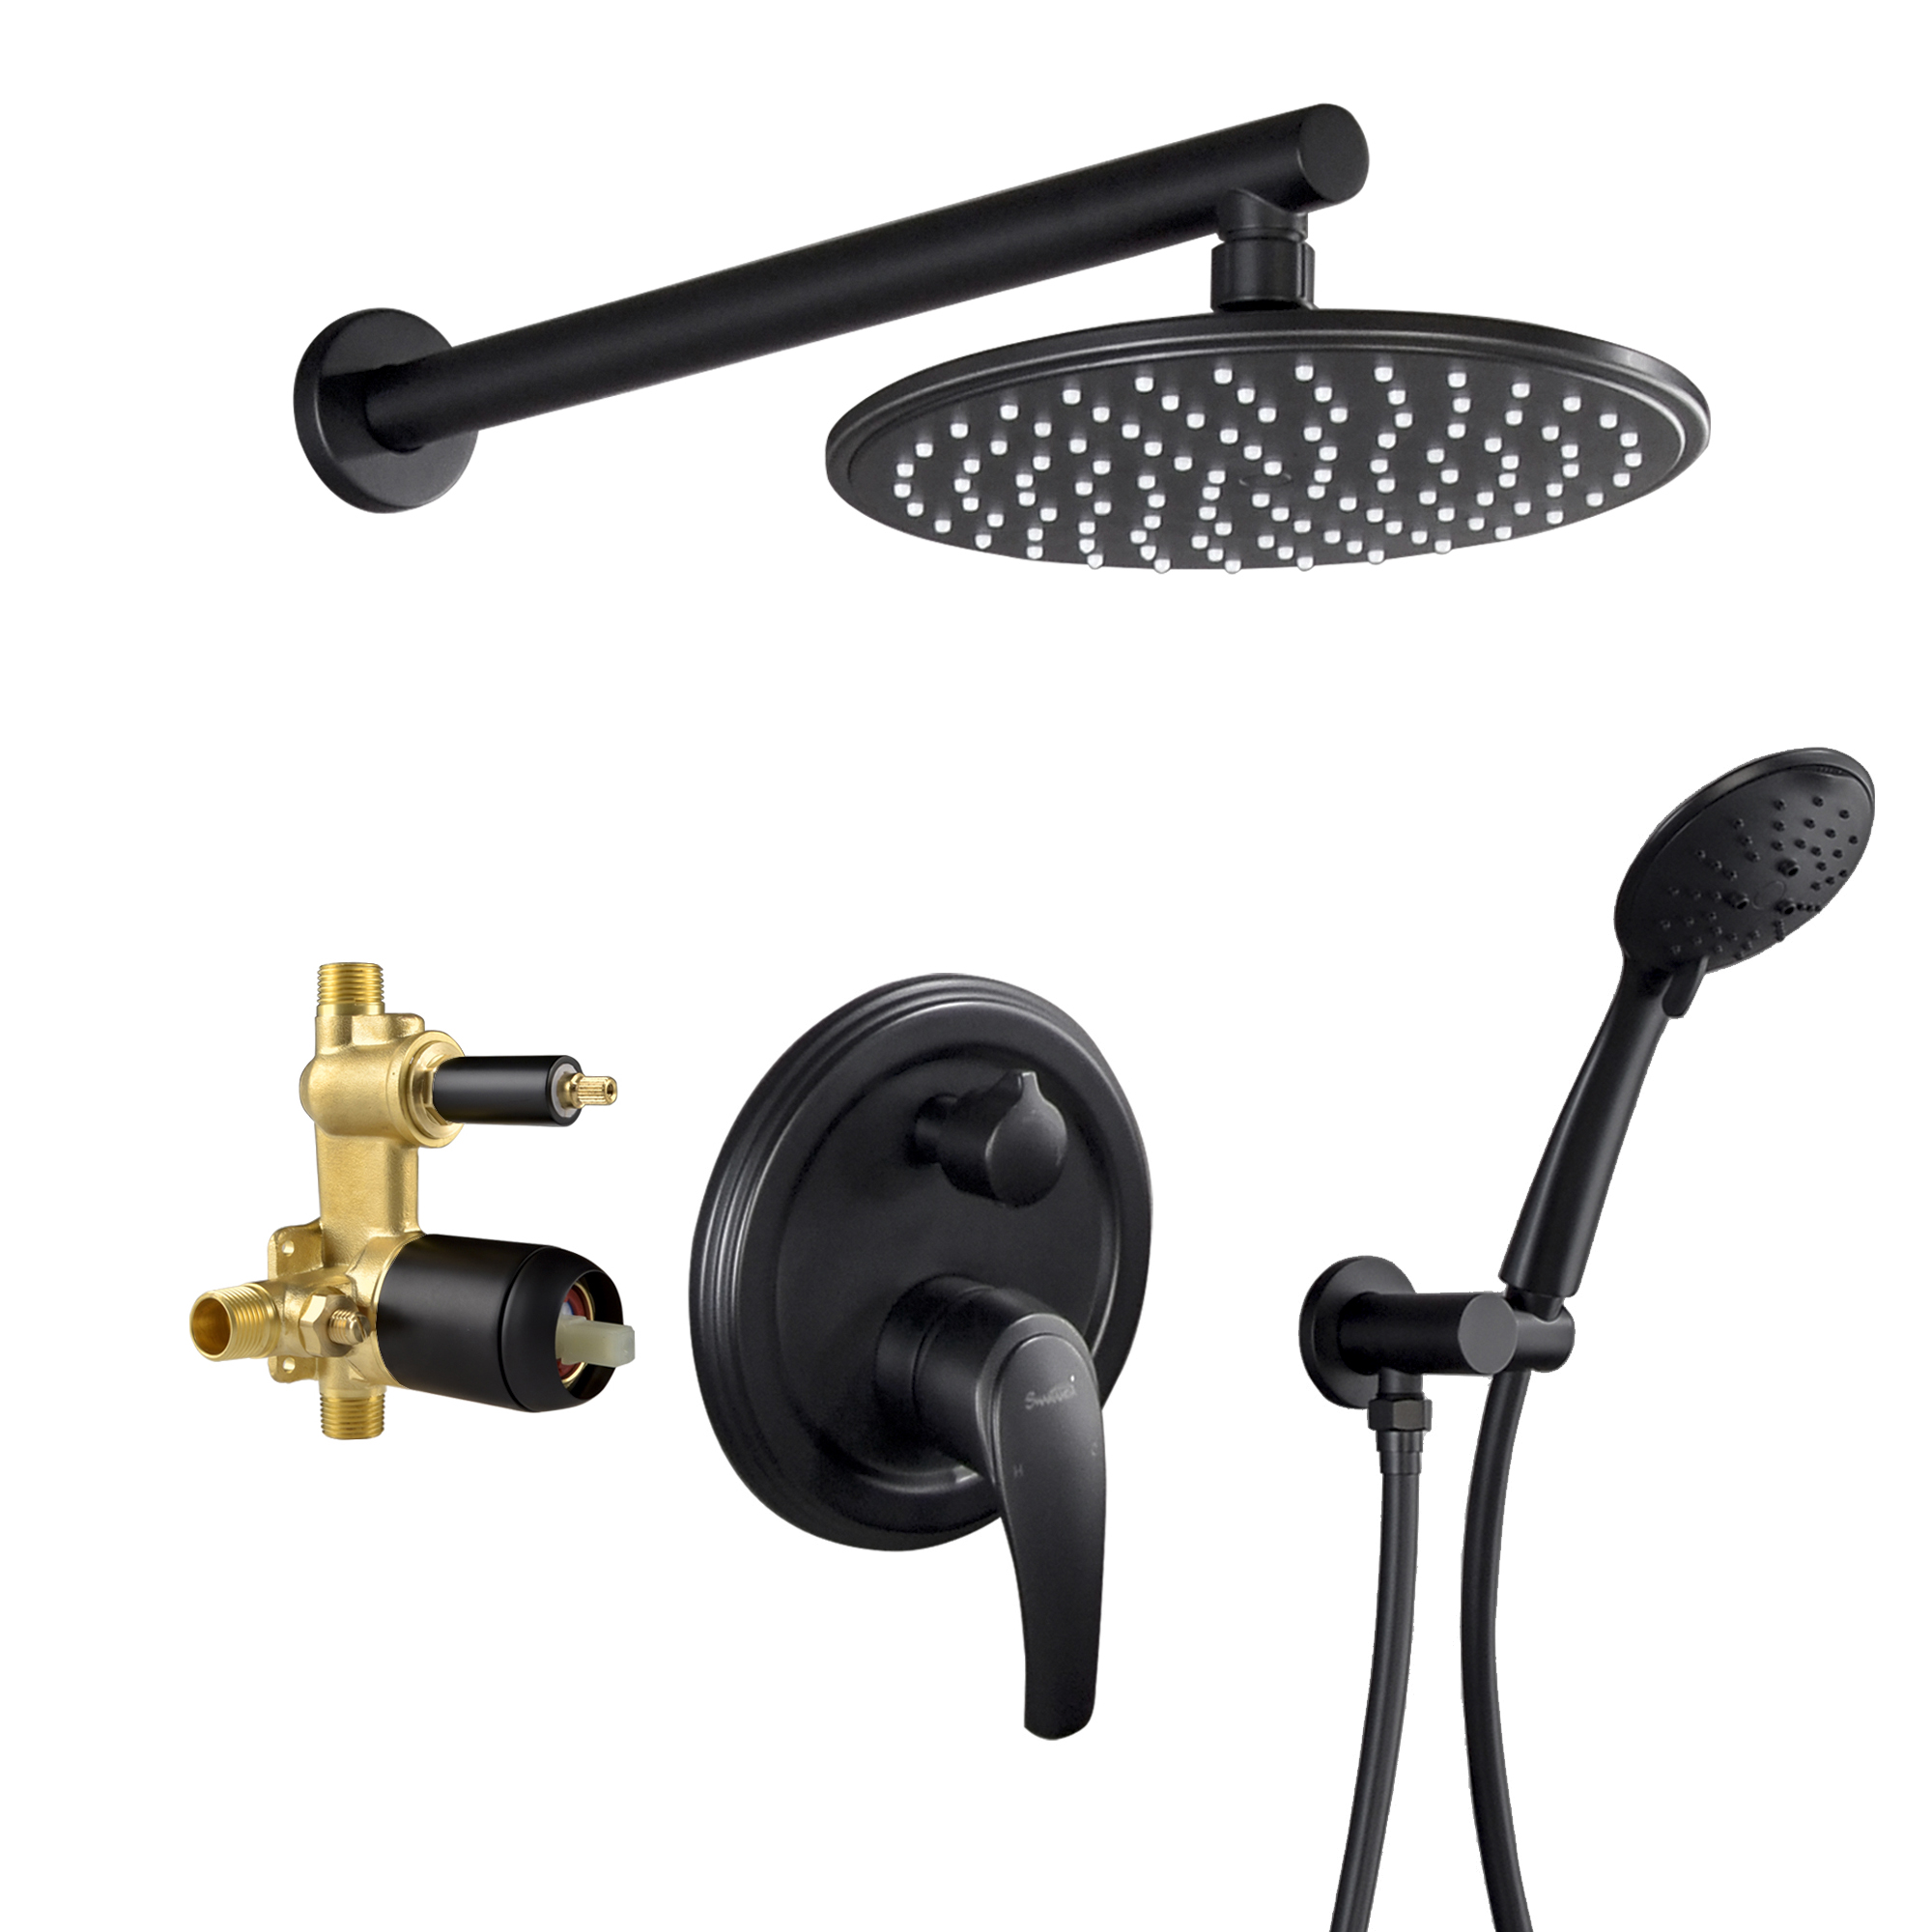 Casainc 3.2 GPM Wall Mounted 10-In Shower System with 5-Spray Patterns (Matte Black)-CASAINC